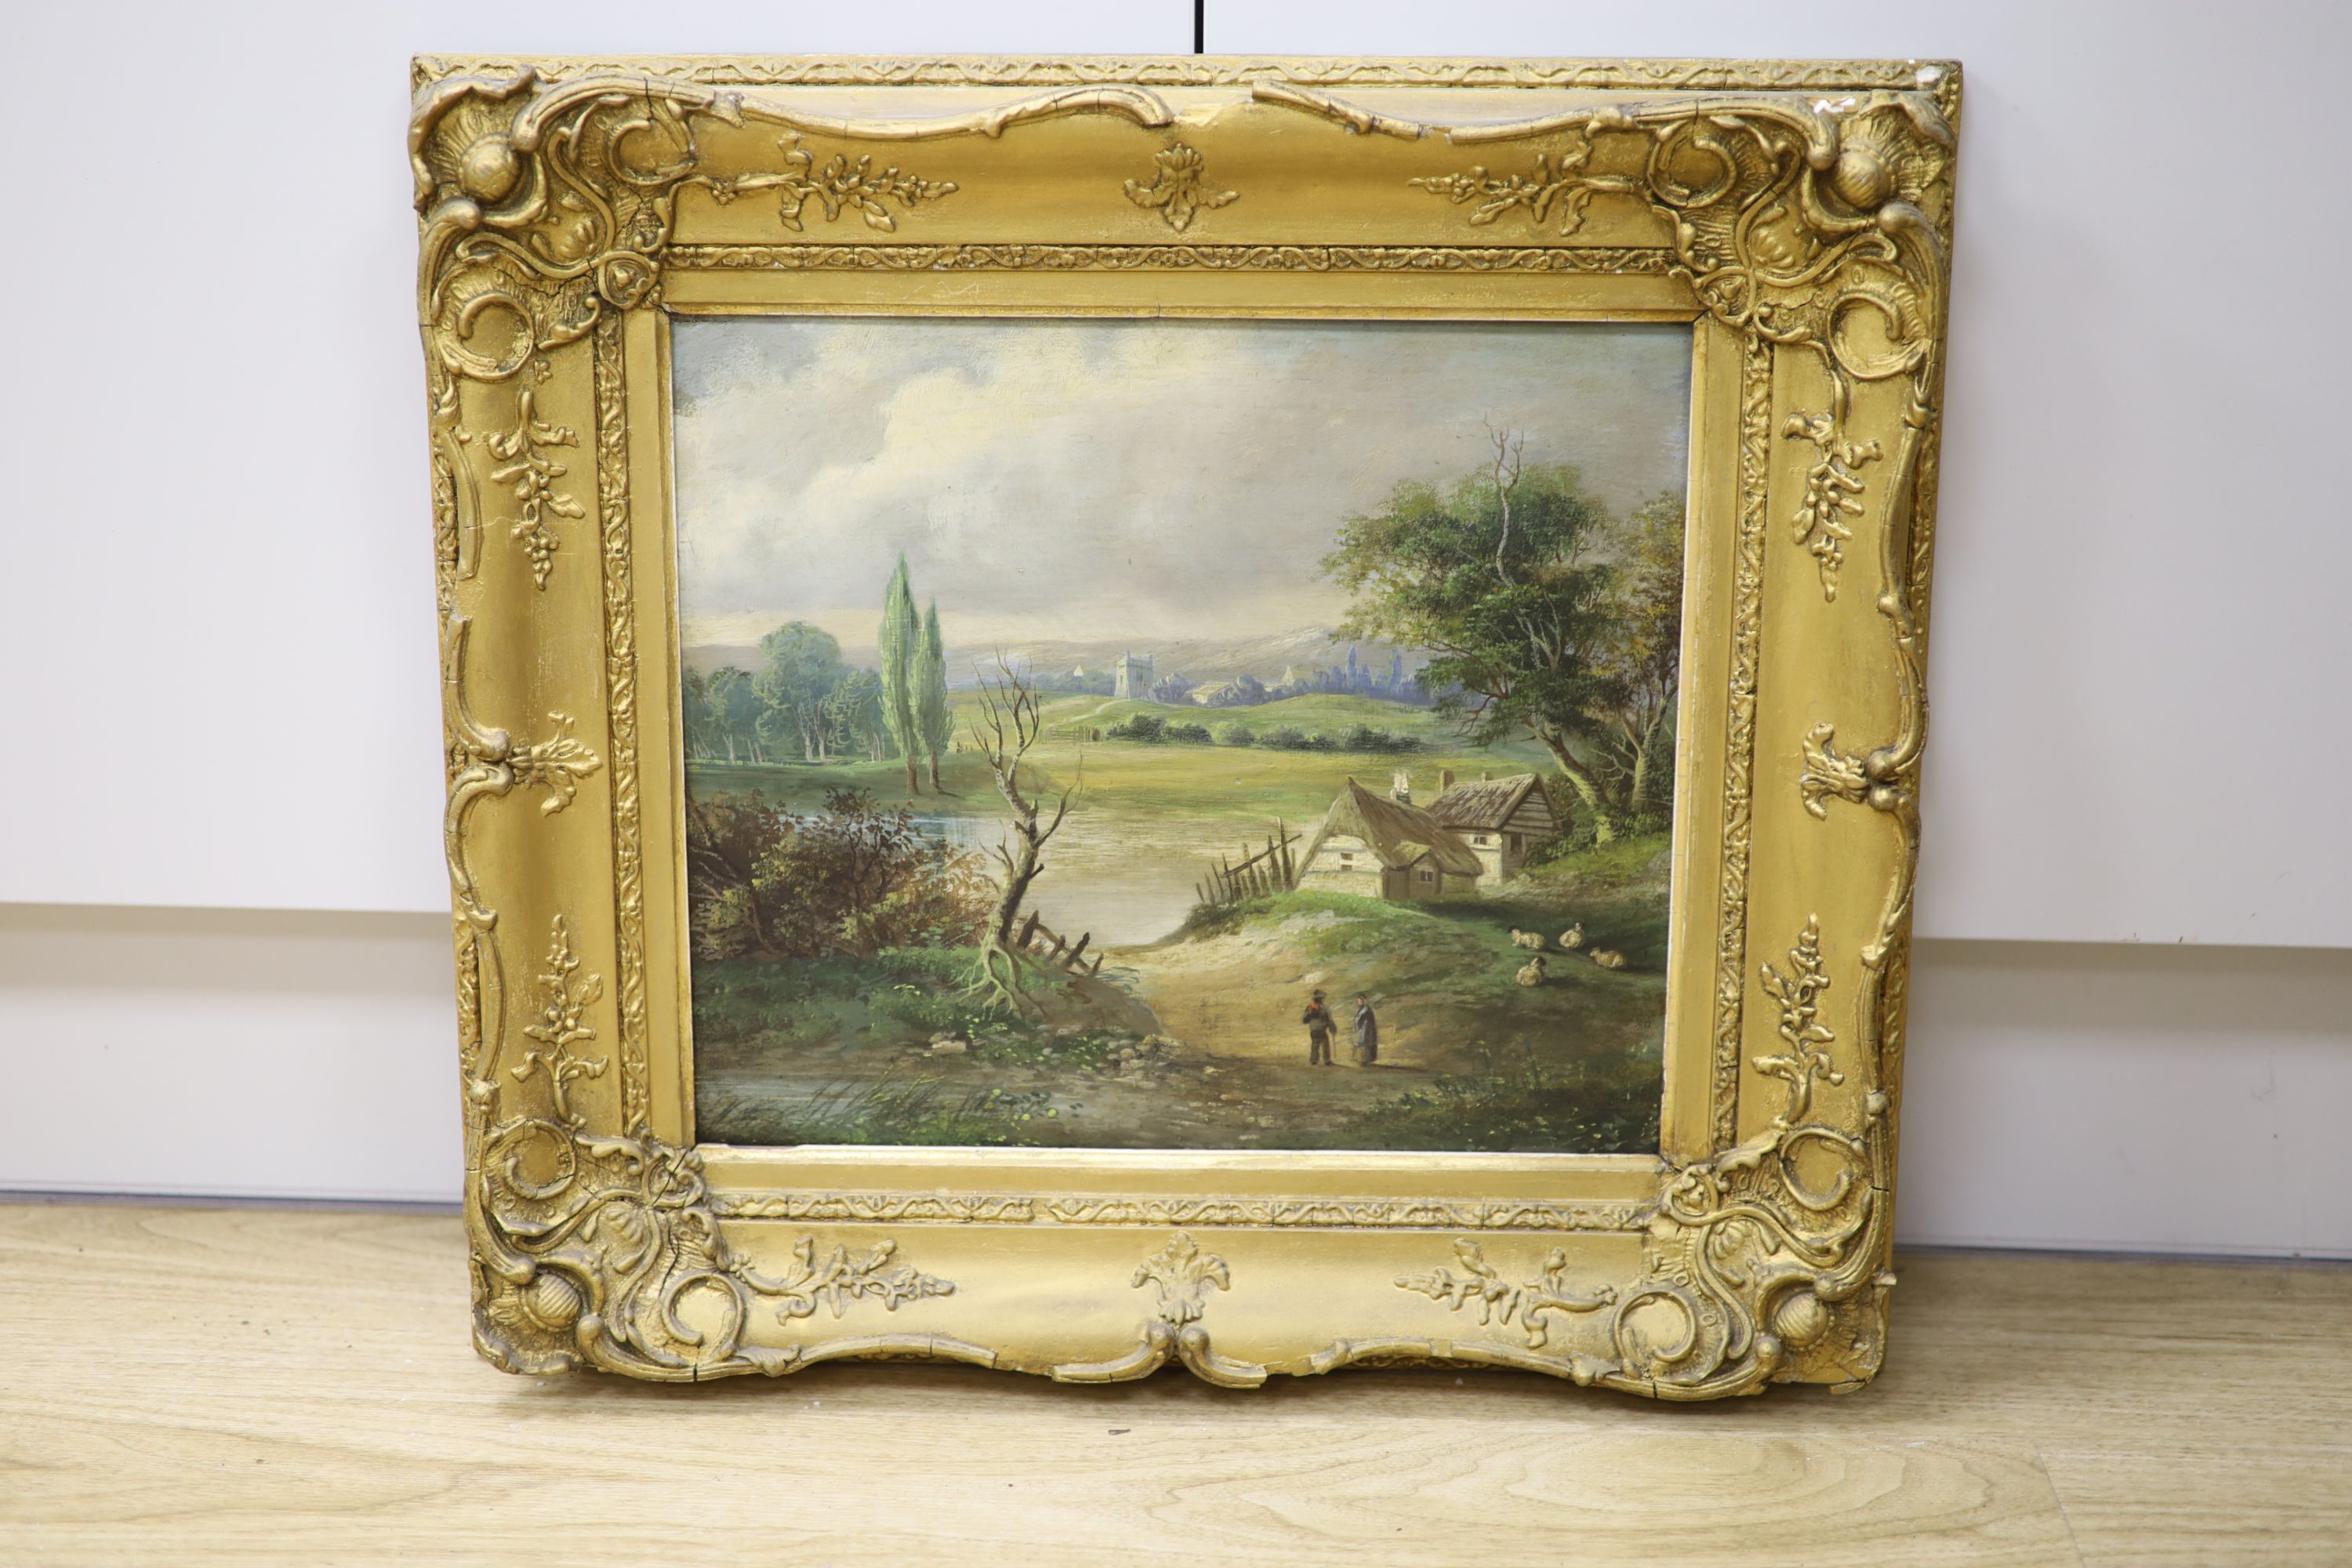 19th century English School, oil on board, Figures in a landscape, 30 x 34cm - Image 2 of 2